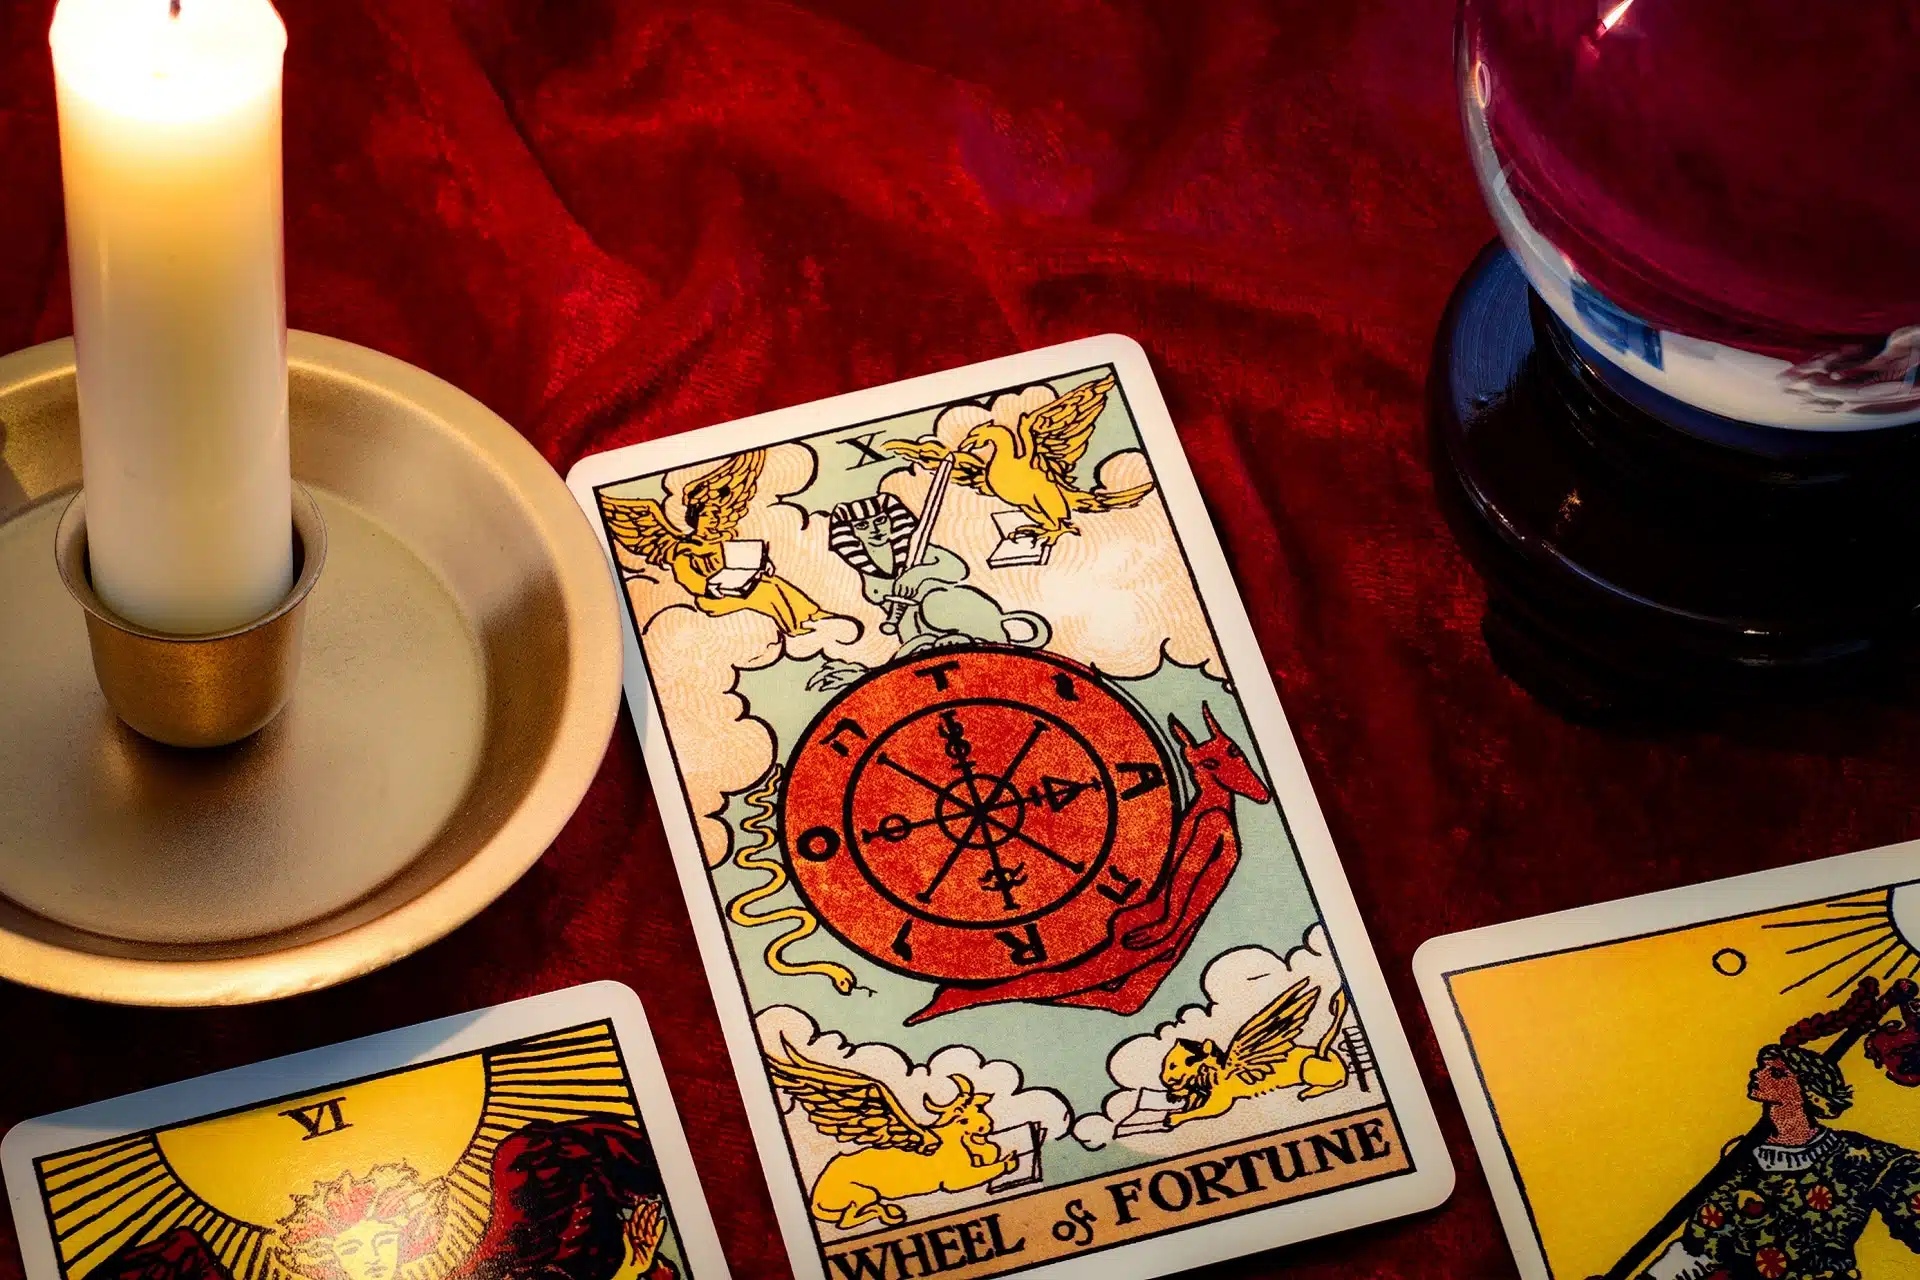 Wheel of fortune card and crystal ball under candle light. Cartomancy is fortune telling using cards, while scrying and clairvoyance is future reading using orbs, both are branches of astrology